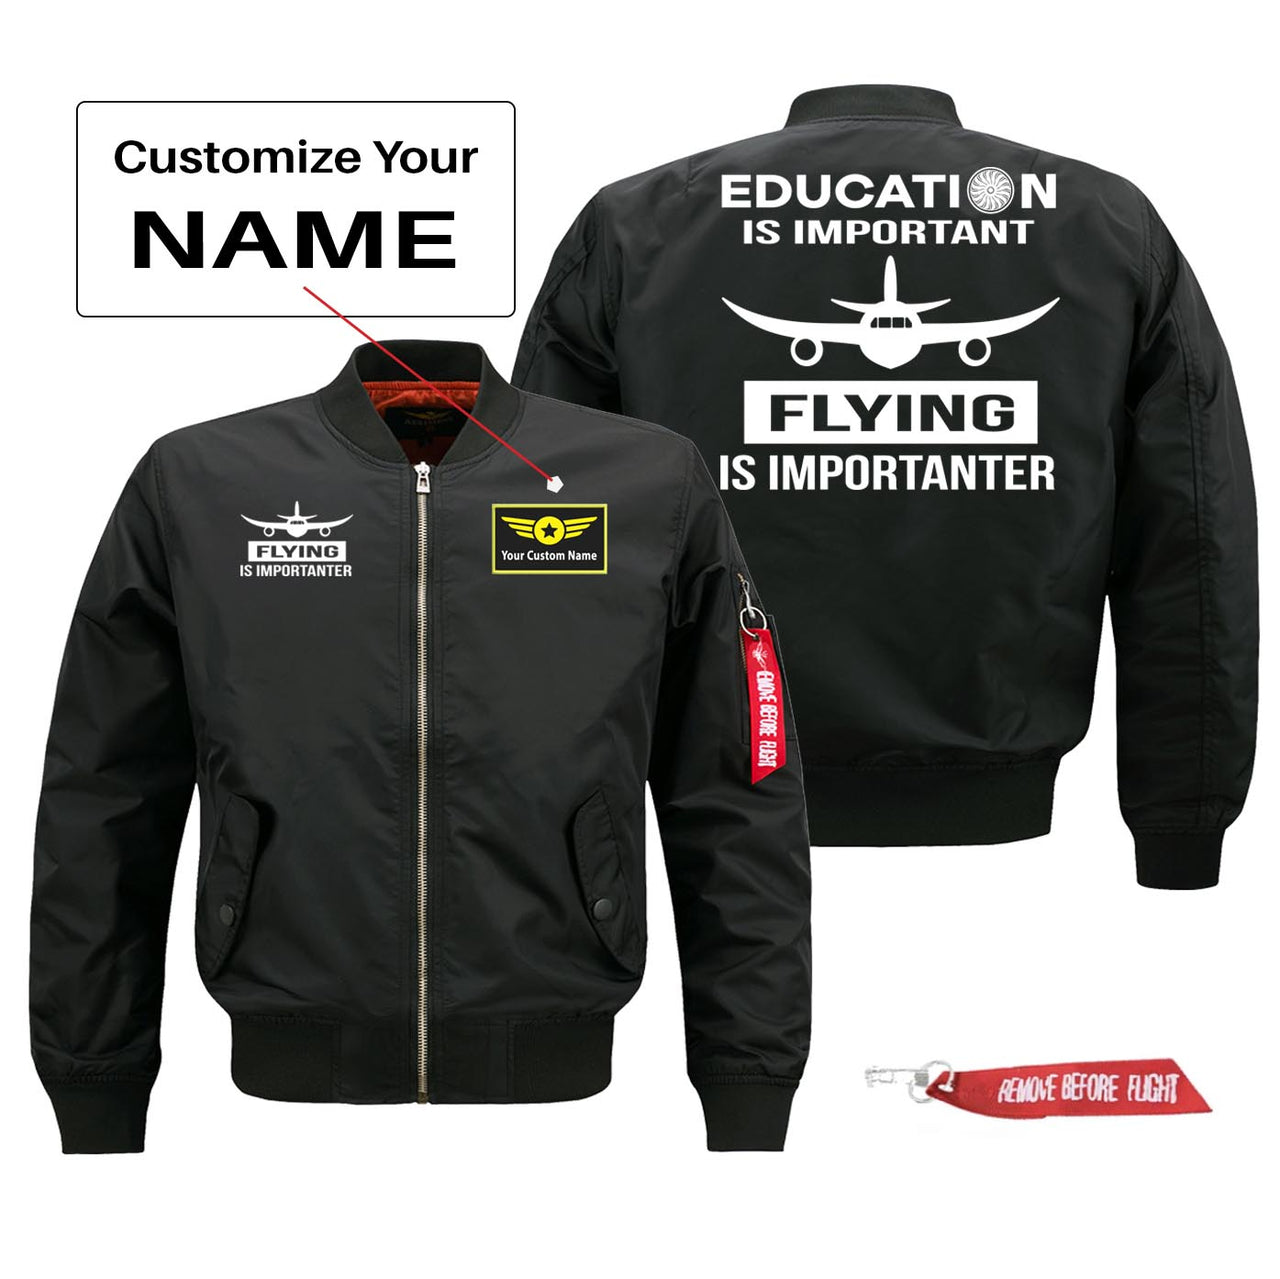 Education Is Important Flying is Importanter Designed Pilot Jackets (Customizable)